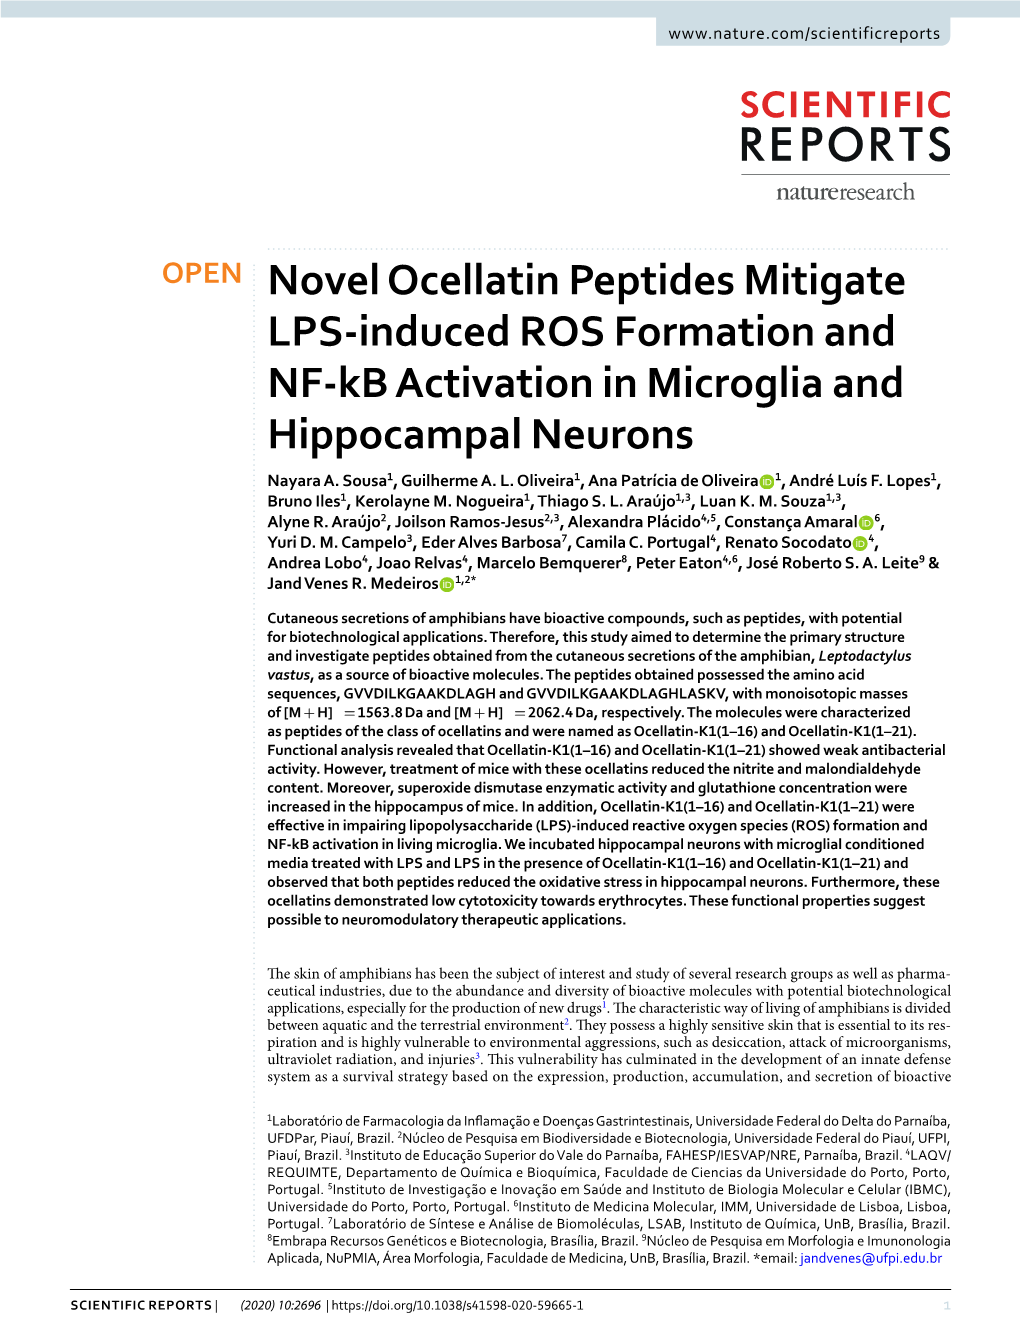 Novel Ocellatin Peptides Mitigate LPS-Induced ROS Formation and NF-Kb Activation in Microglia and Hippocampal Neurons Nayara A